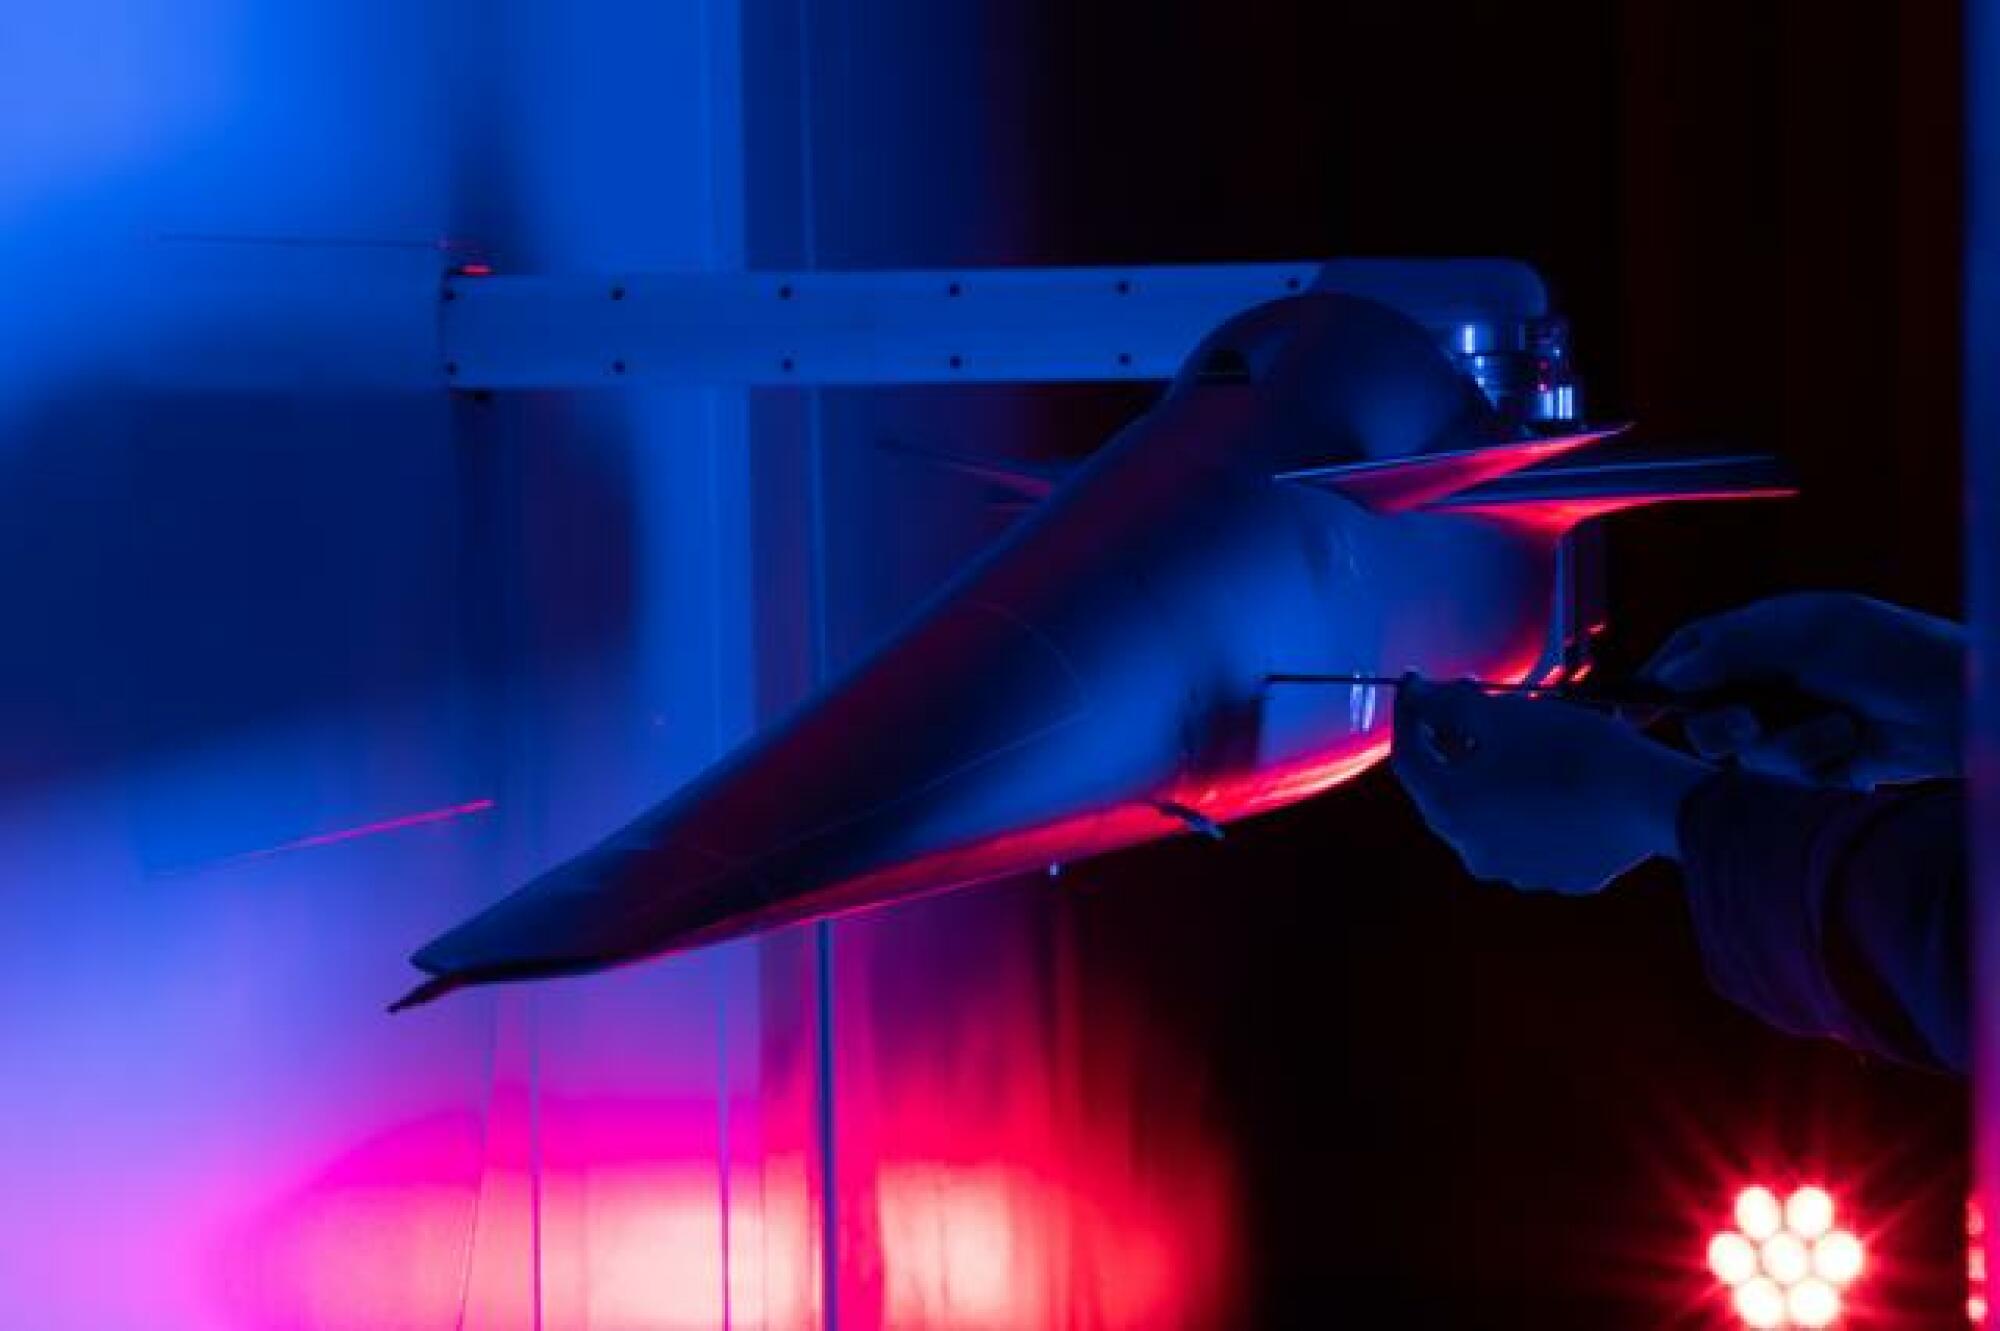 The nose of an X-59 model in a wind tunnel during testing at Lockheed Martin Skunk Works in Palmdale, California.